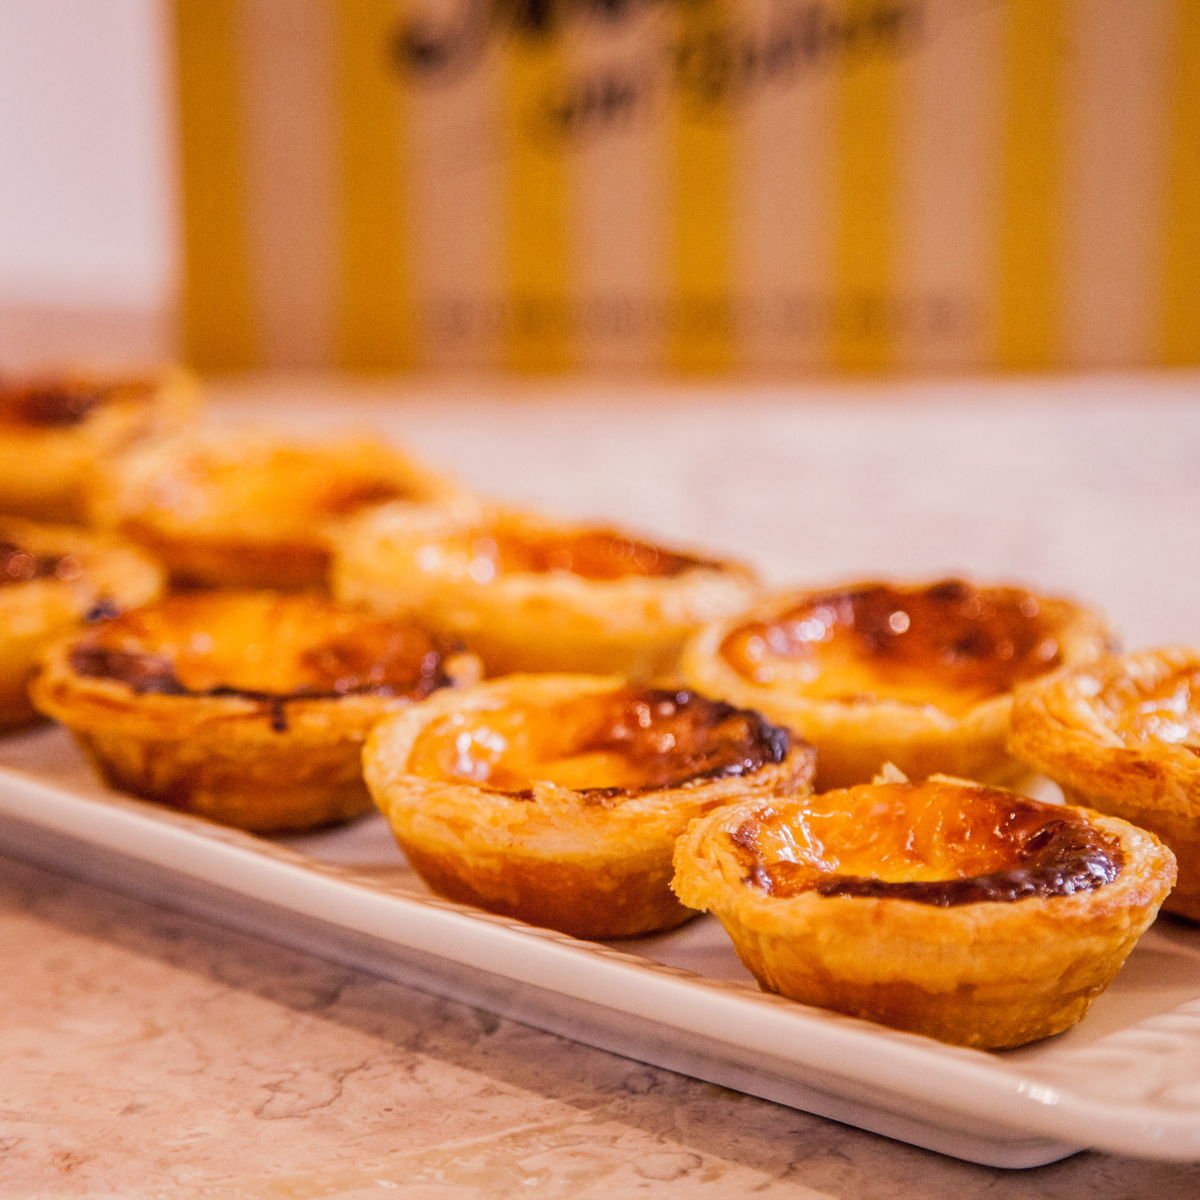 Discover how to make the famous Pastel de Nata